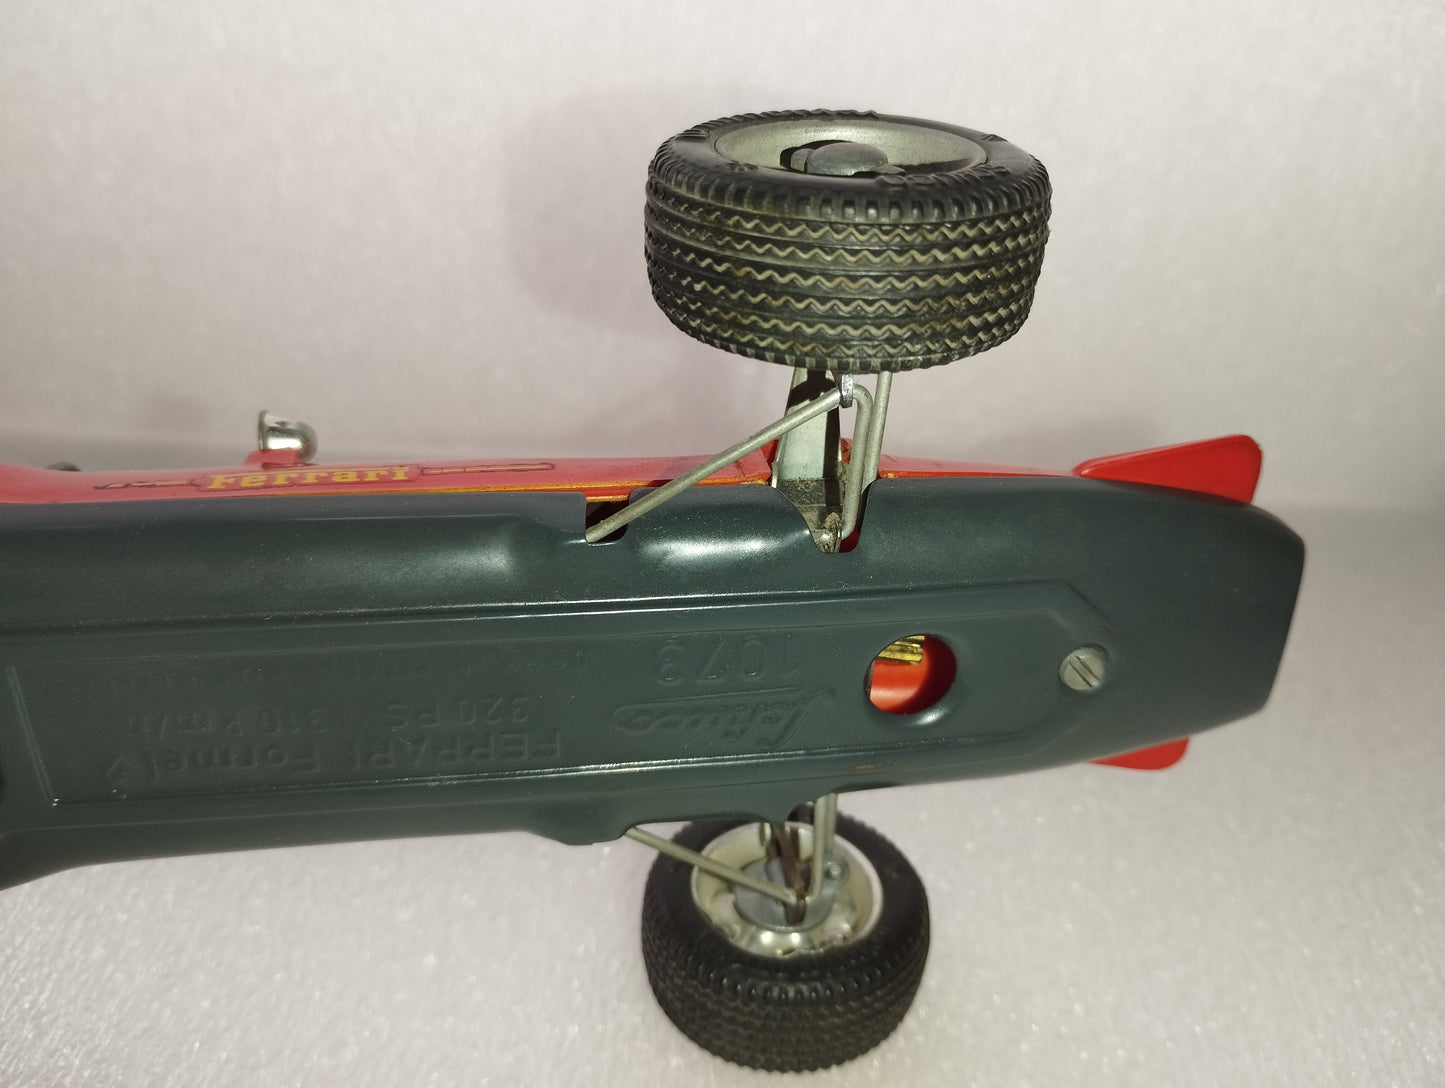 Ferrari 320 PS Formel 2 model

 Produced in 1965 by Schuco Code .1073

 Scale 1:18